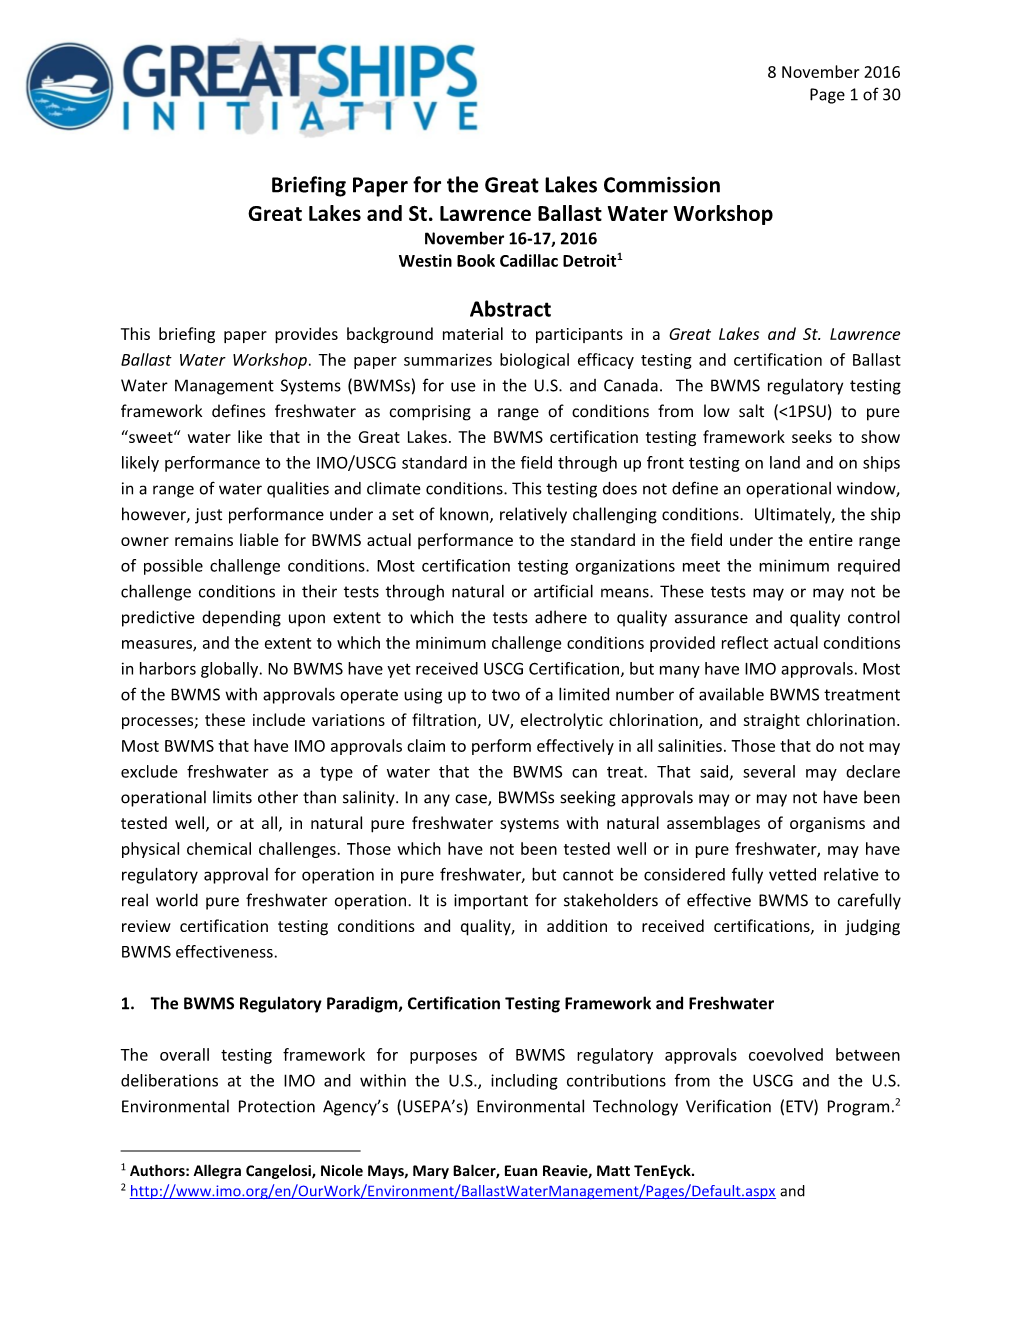 Briefing Paper for the Great Lakes Commission Great Lakes and St. Lawrence Ballast Water Workshop Abstract